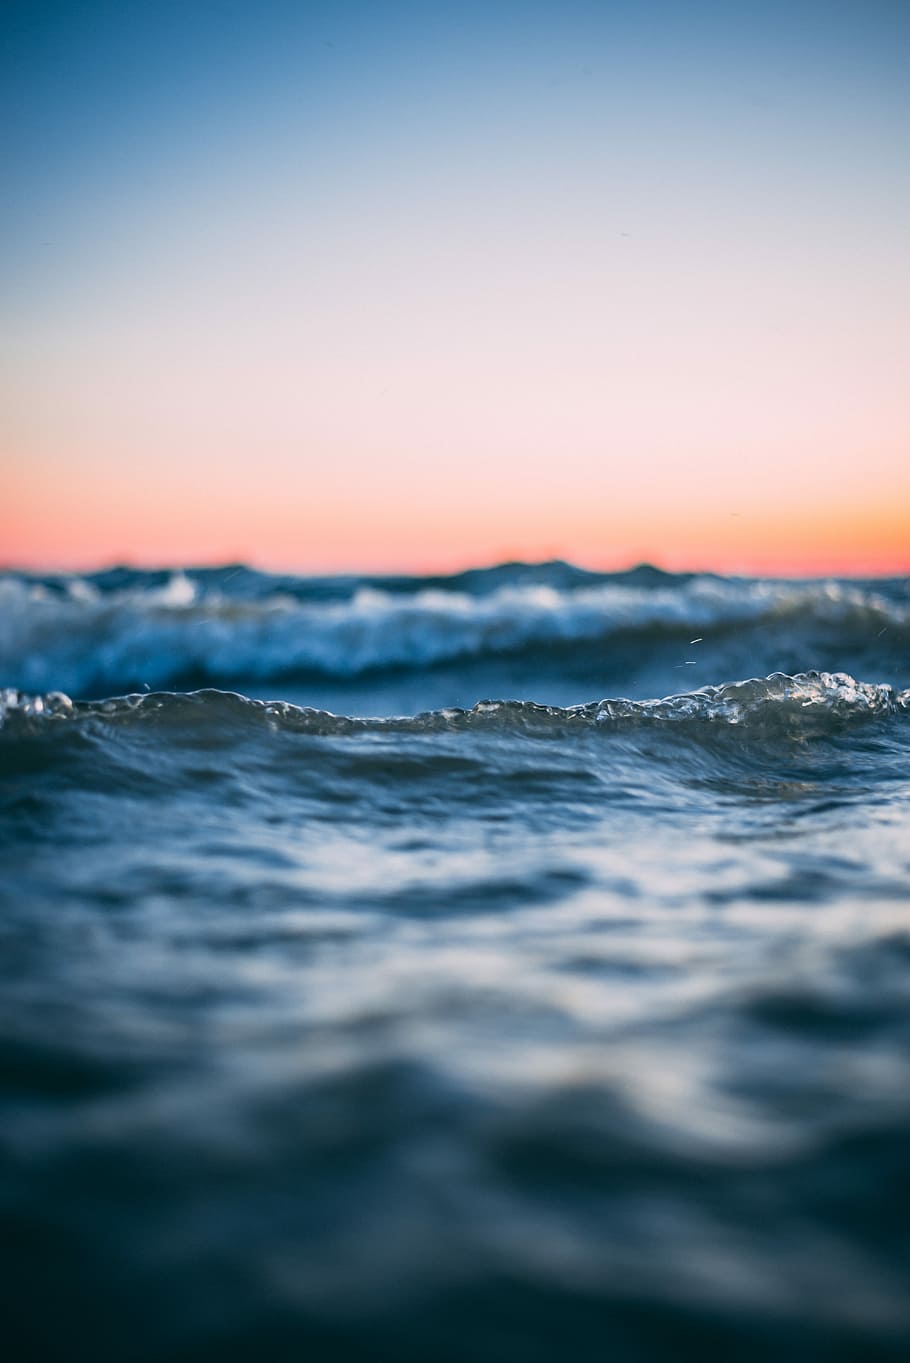 body of water photo, body of water waves at golden hour, tide